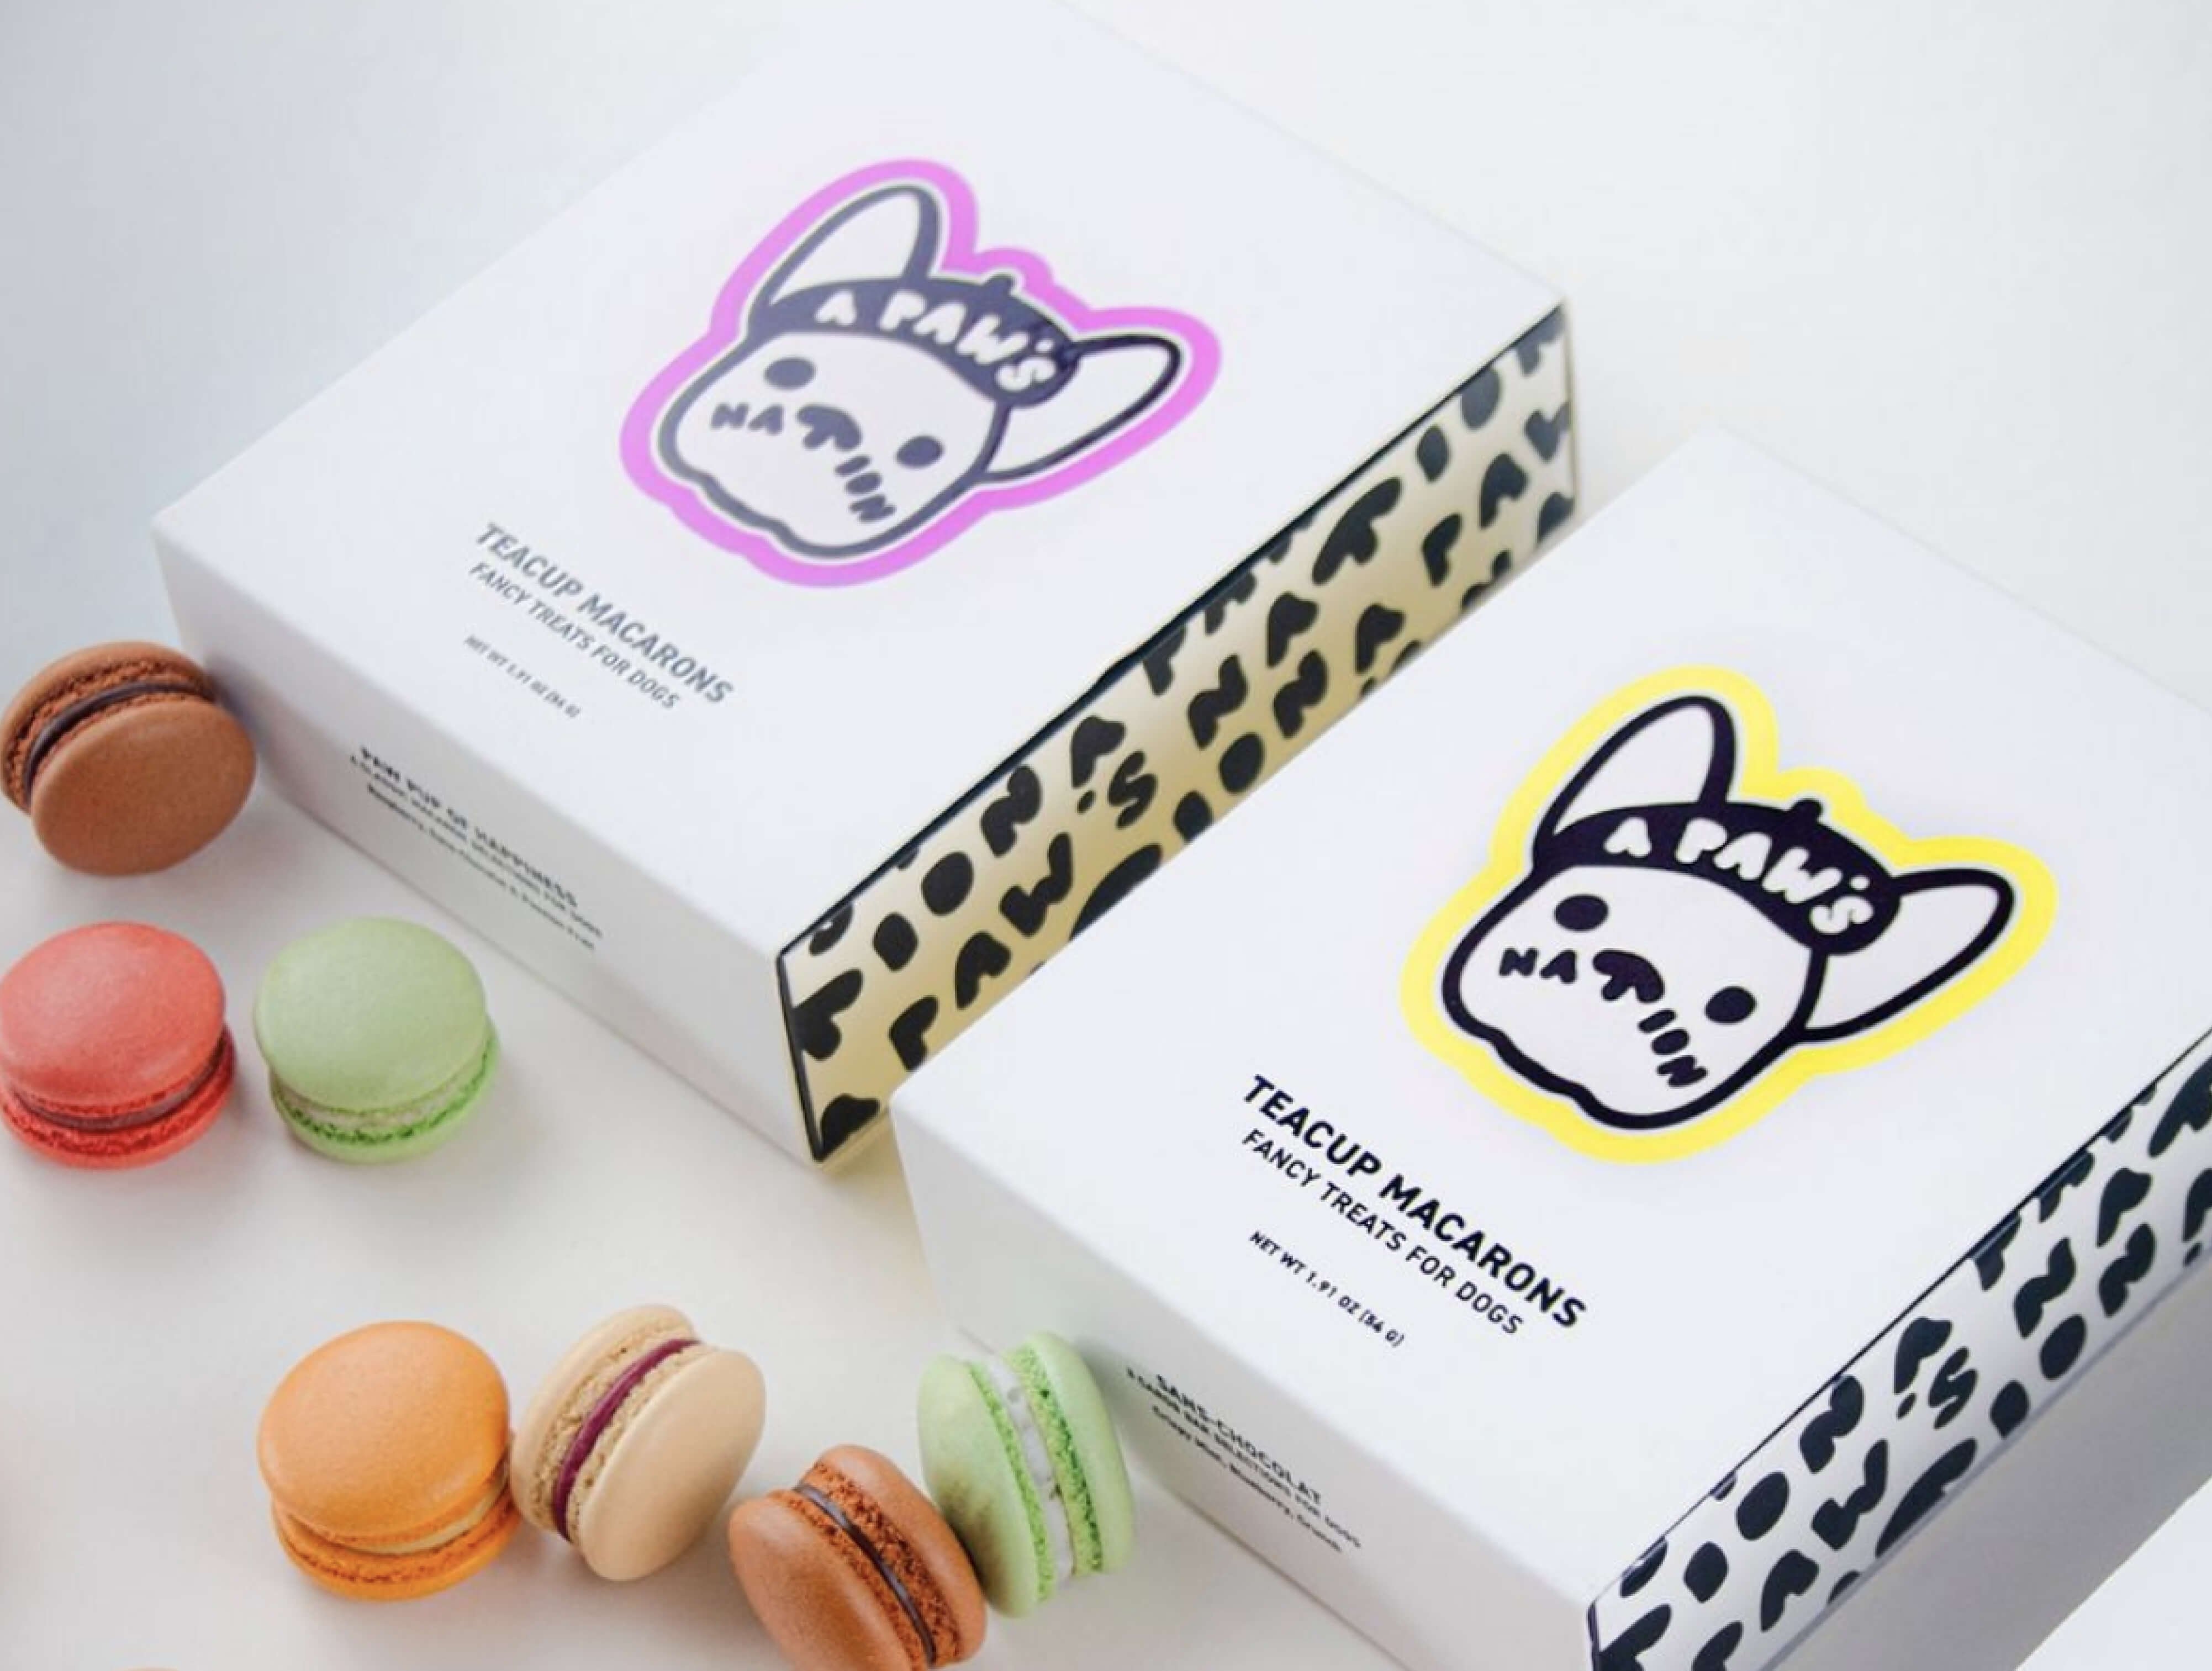 Jacober Creative Brand Identity for A Paw's Nation